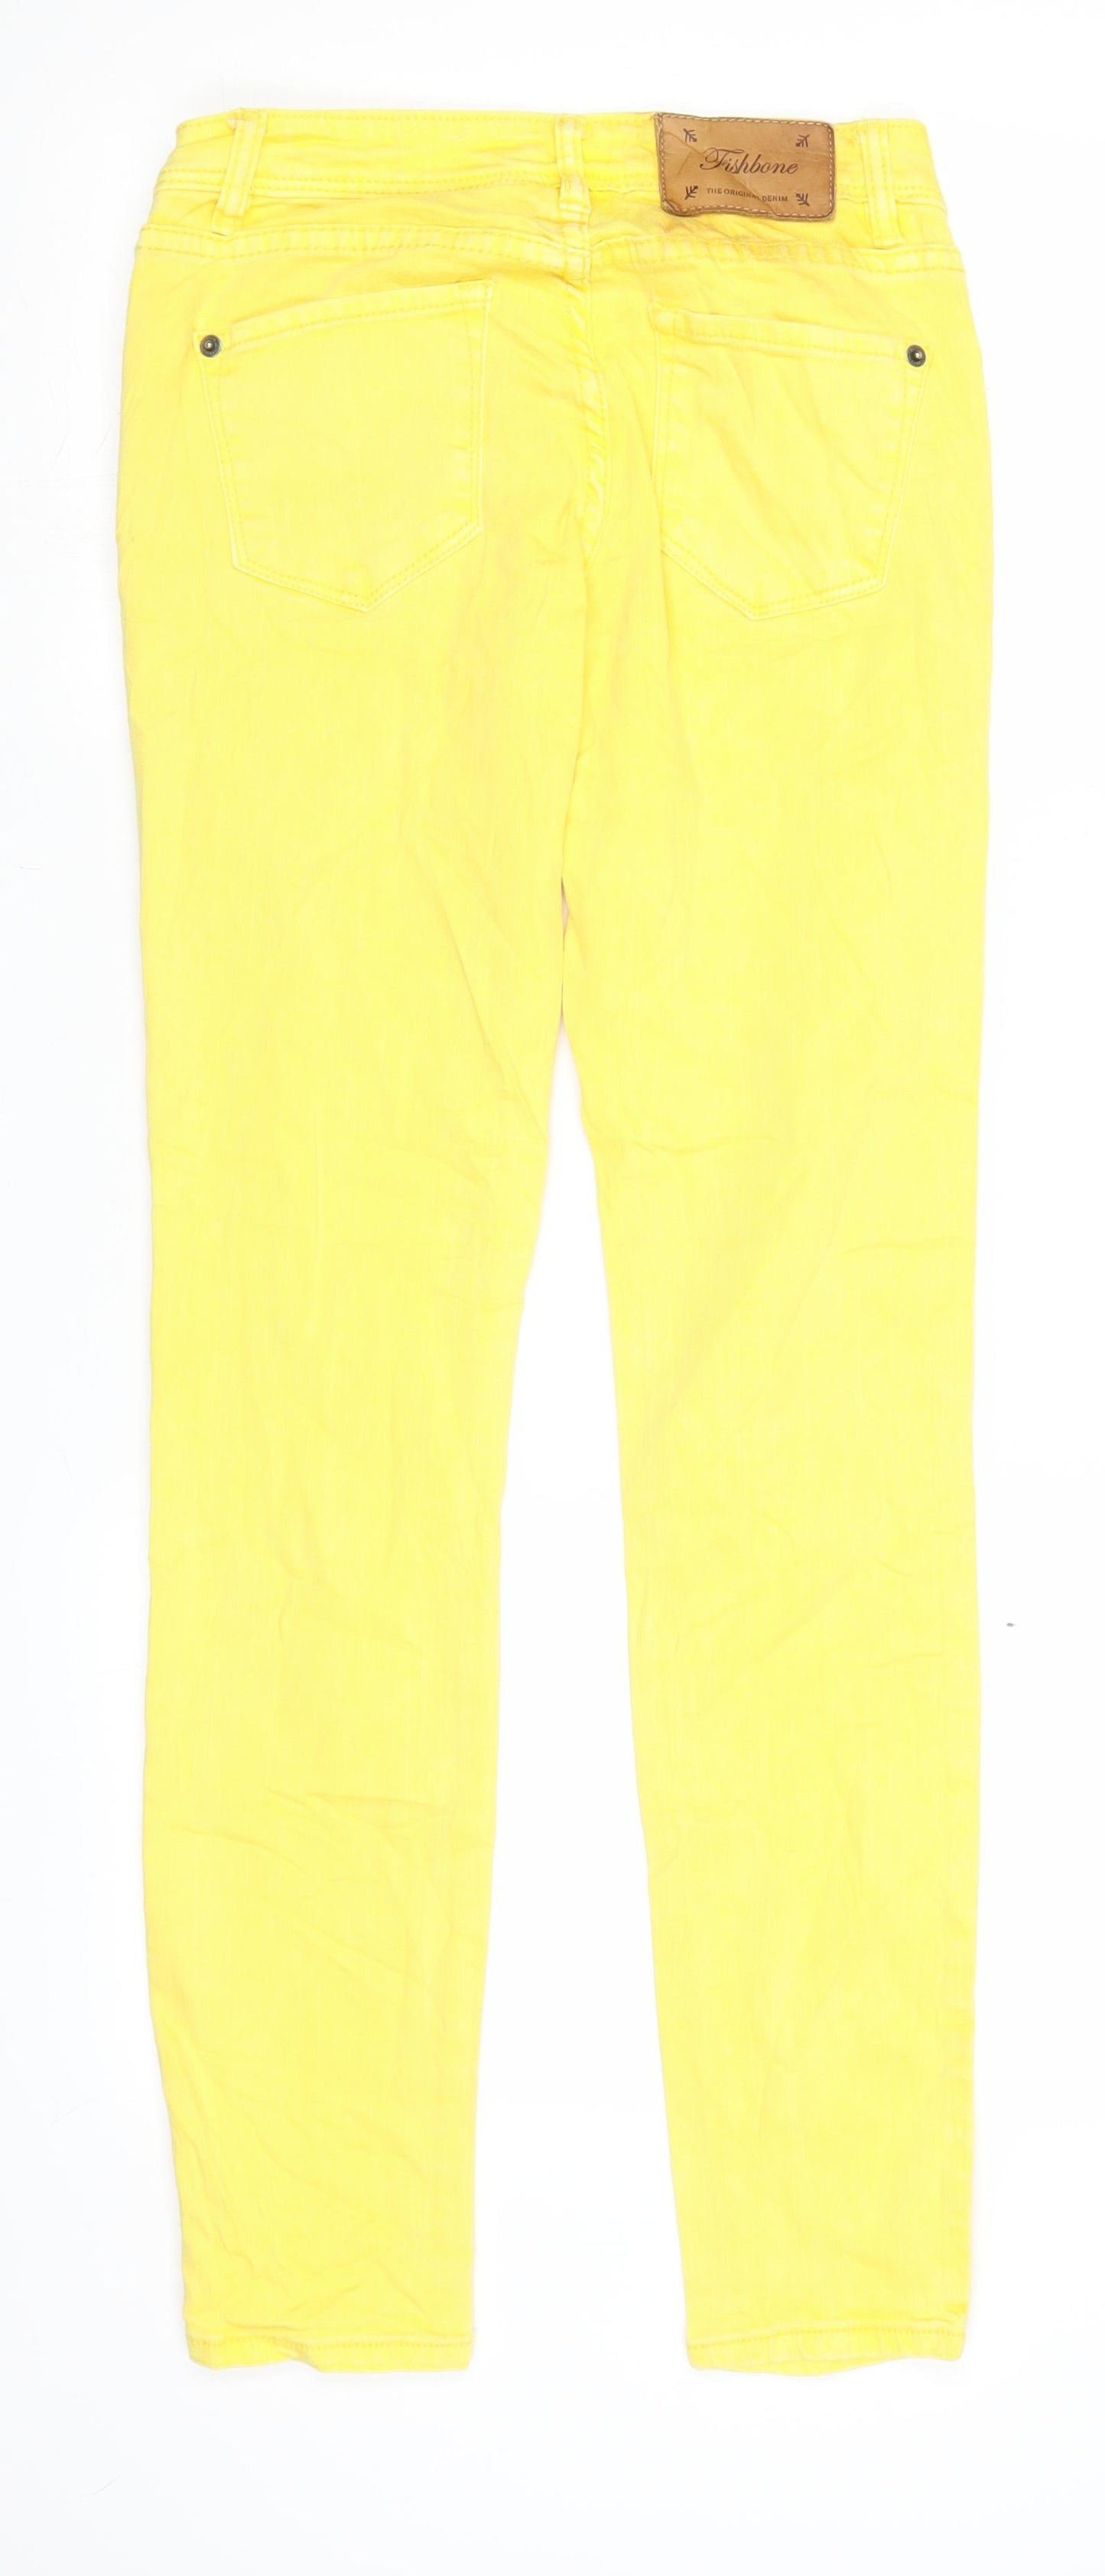 Fishbone Womens Yellow  Denim Jegging Jeans Size XS L30 in